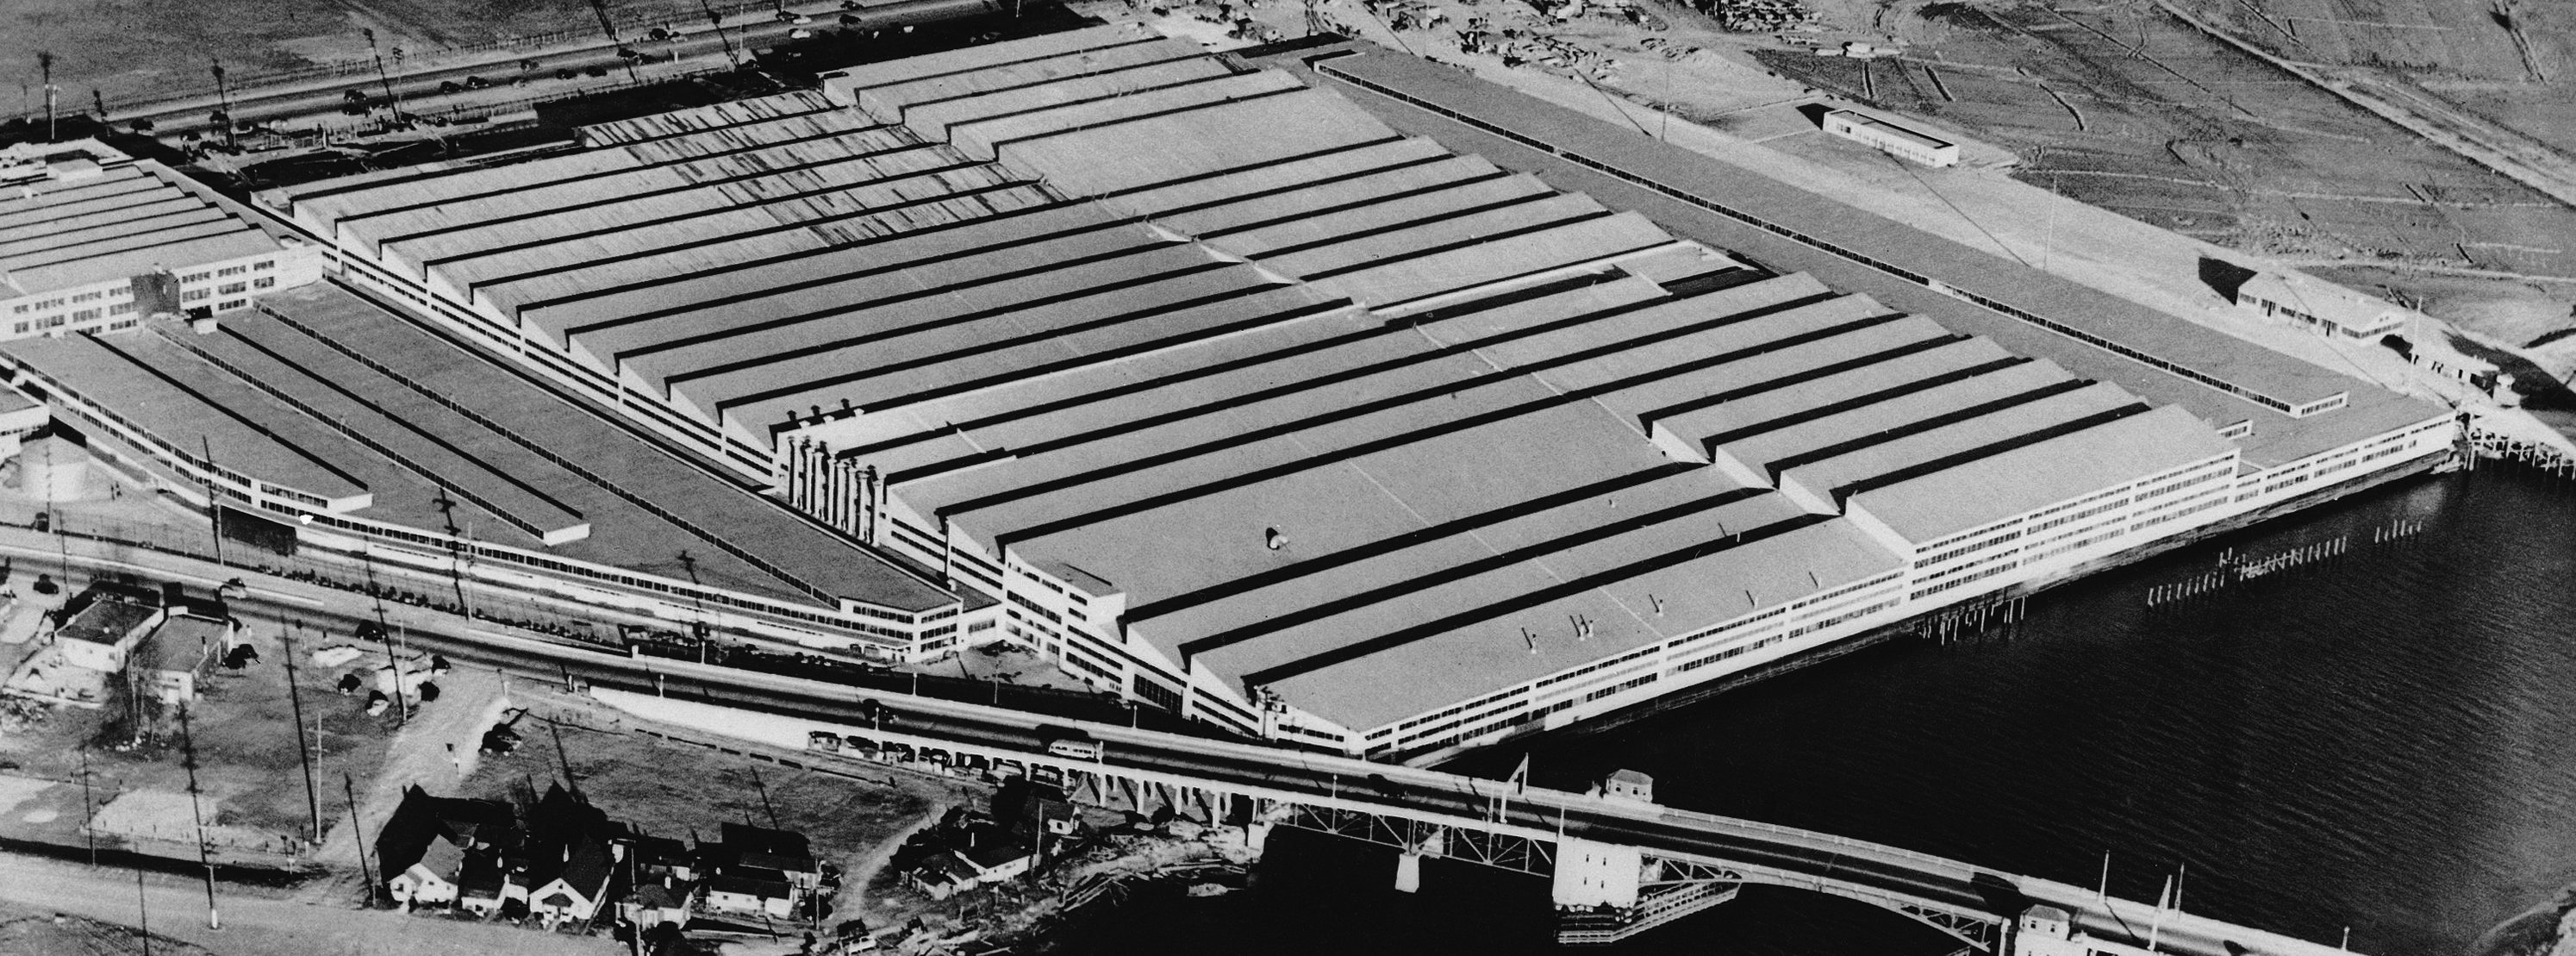 Boeing and U.S. Army Hid an Entire Airplane Factory During World War II